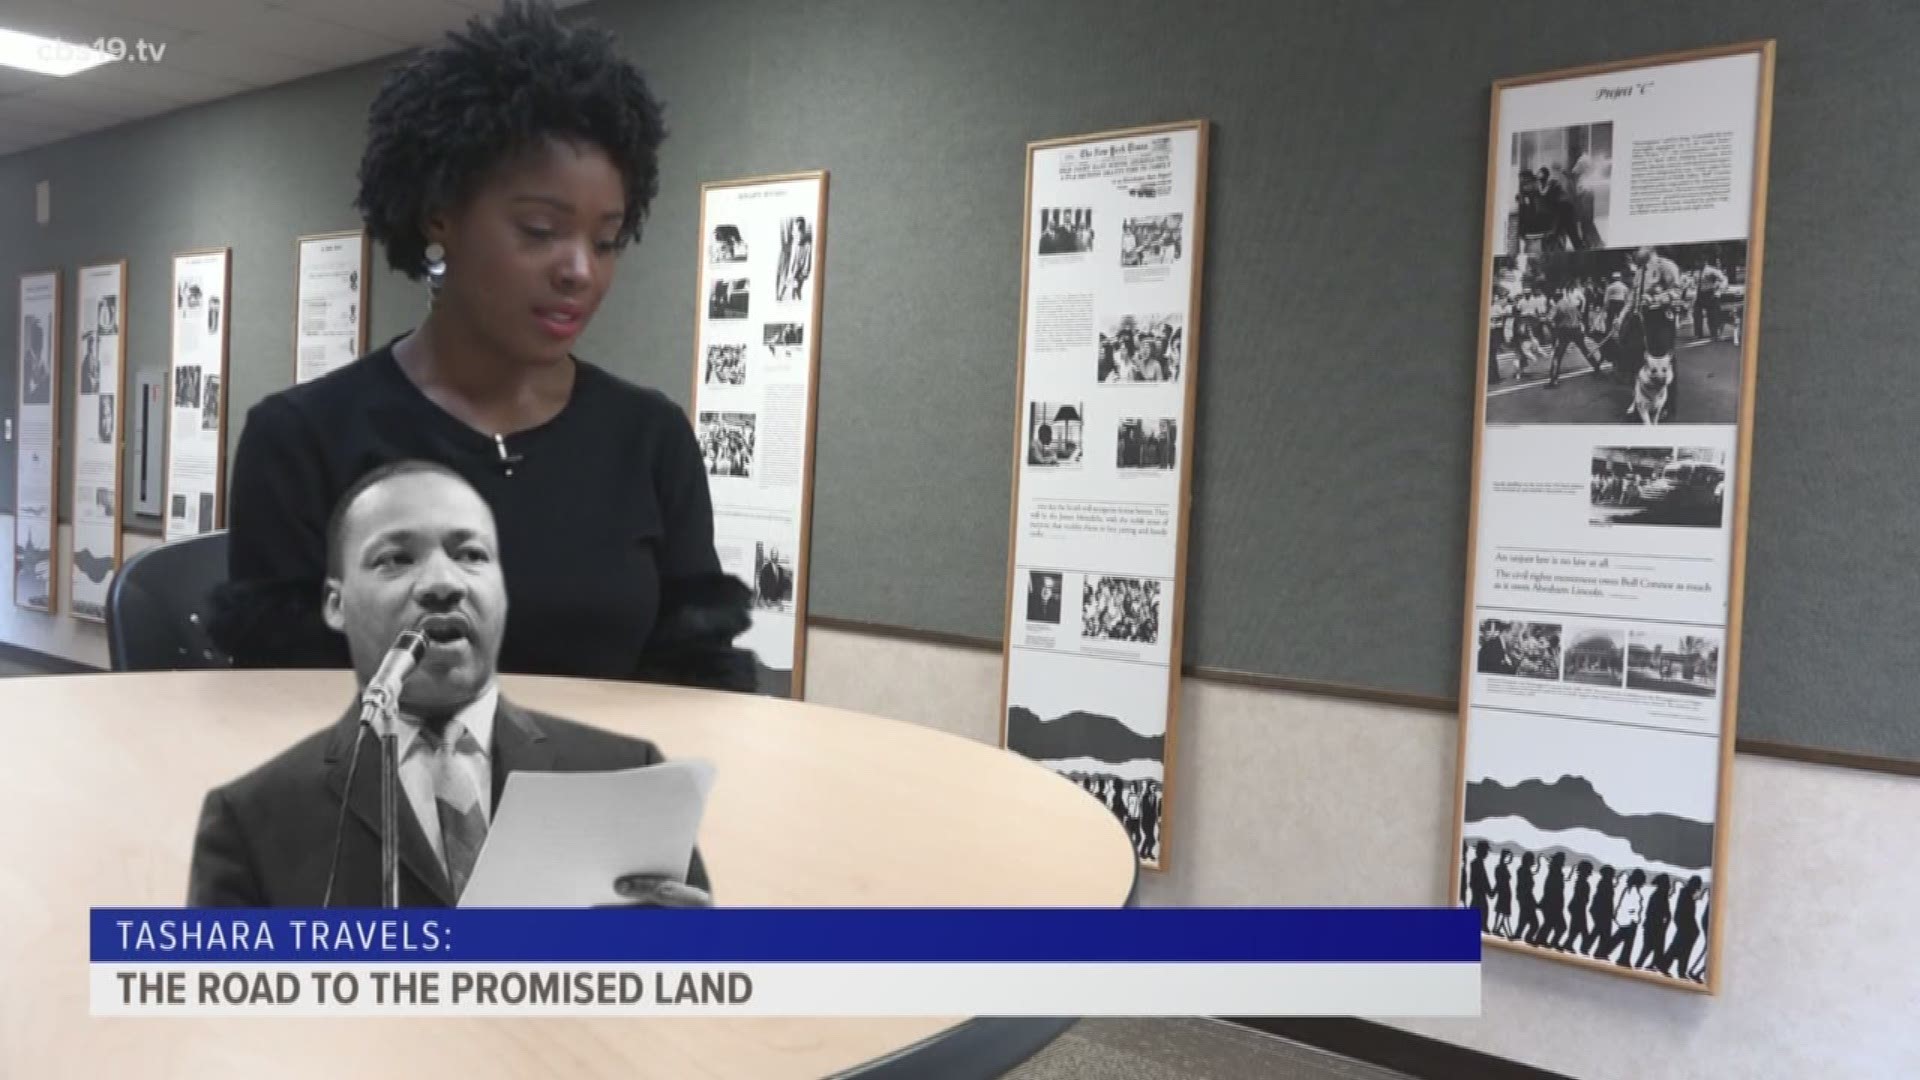 Tashara heads to LeTourneau University's Longview Hall for an exhibit that goes back in time, documenting the strides made by leaders of the civil rights movement.